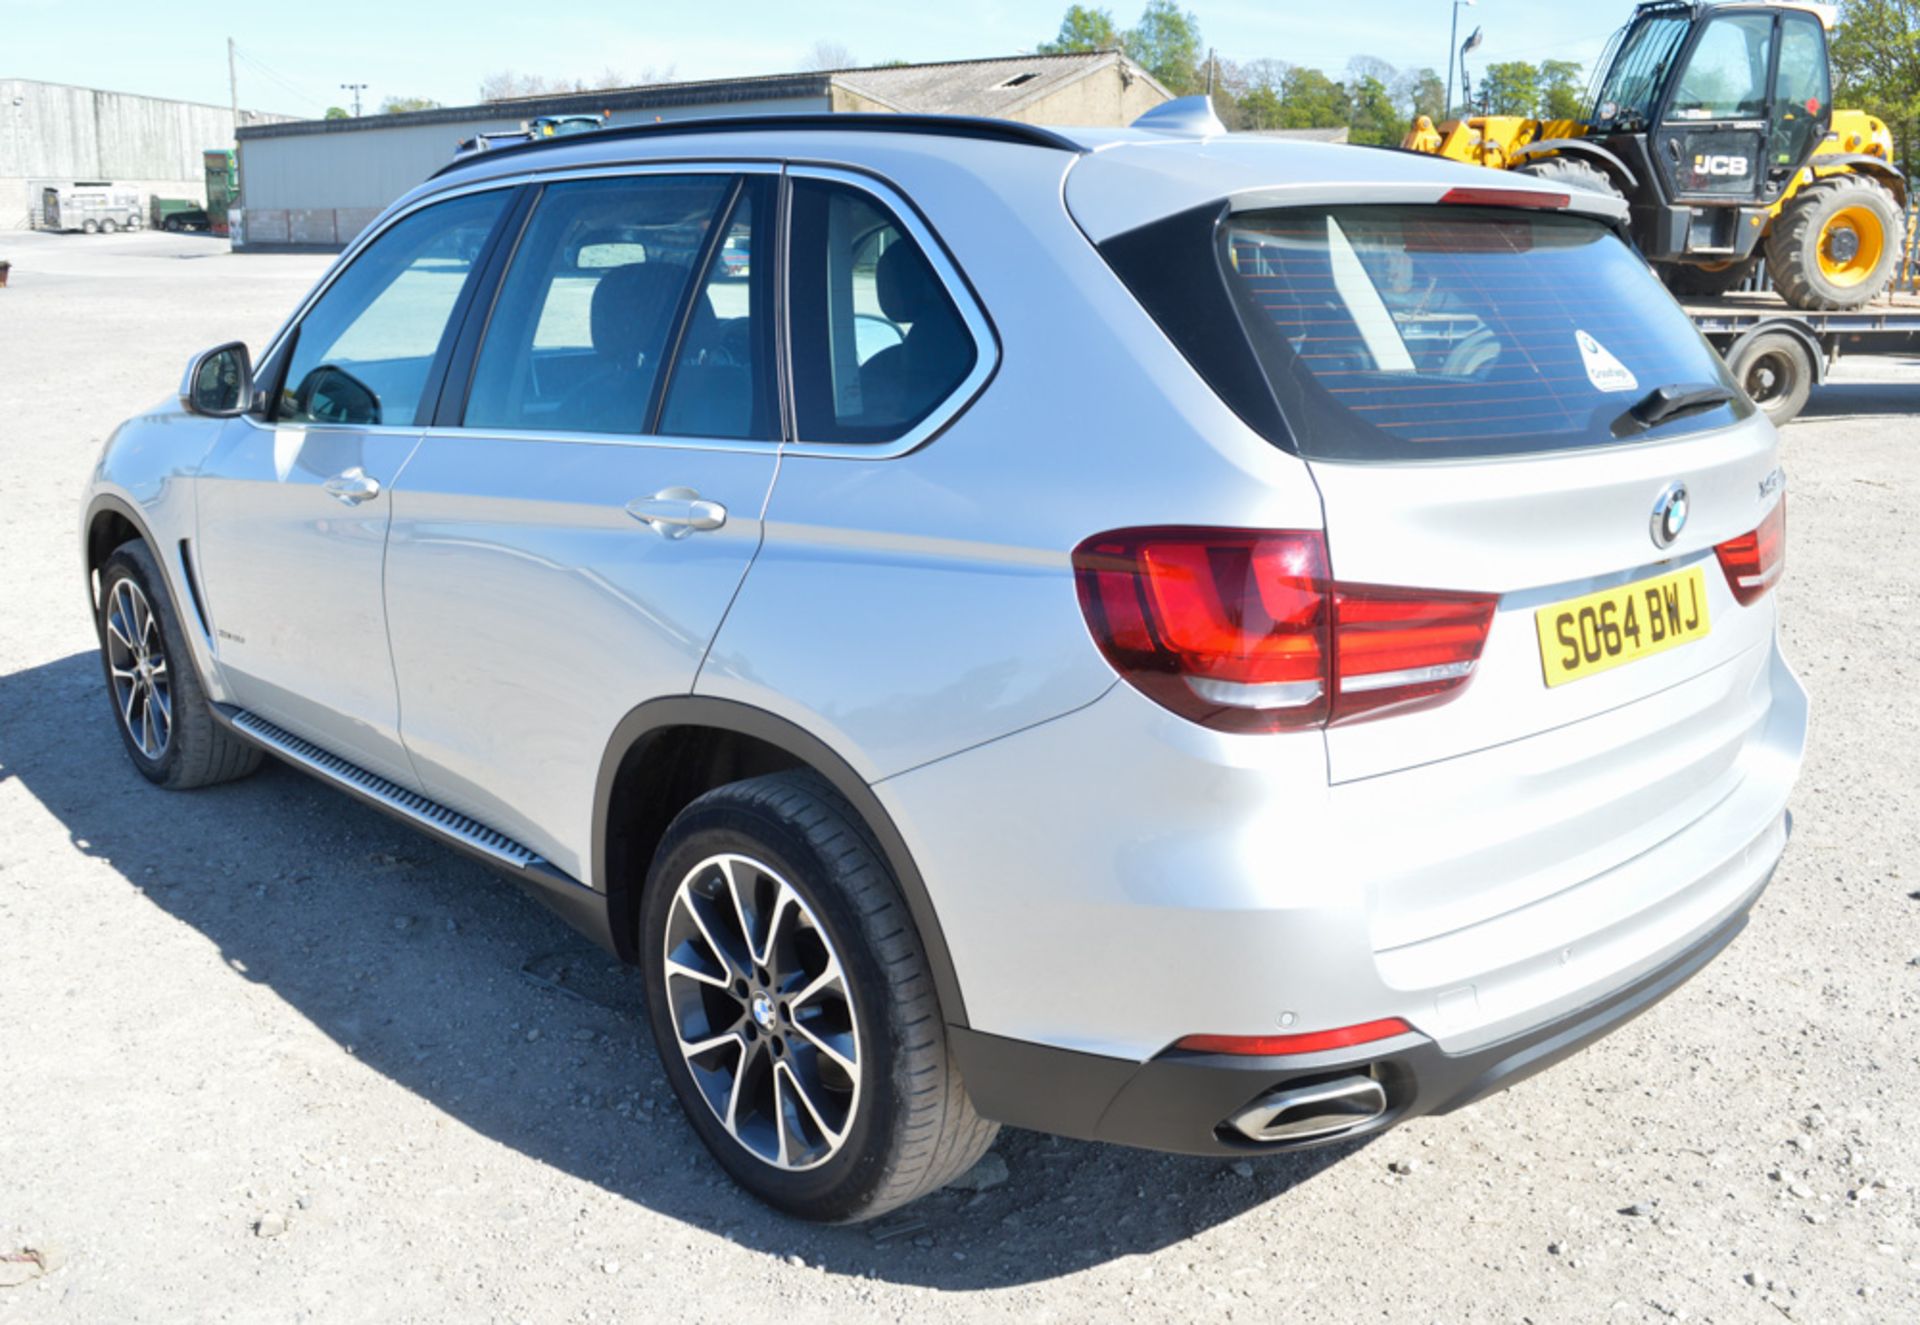 BMW X5 40D SE 3.0 Diesel XDrive automatic 5 door 5 seat SUV   Registration Number: SO64 BWJ Date - Image 3 of 14